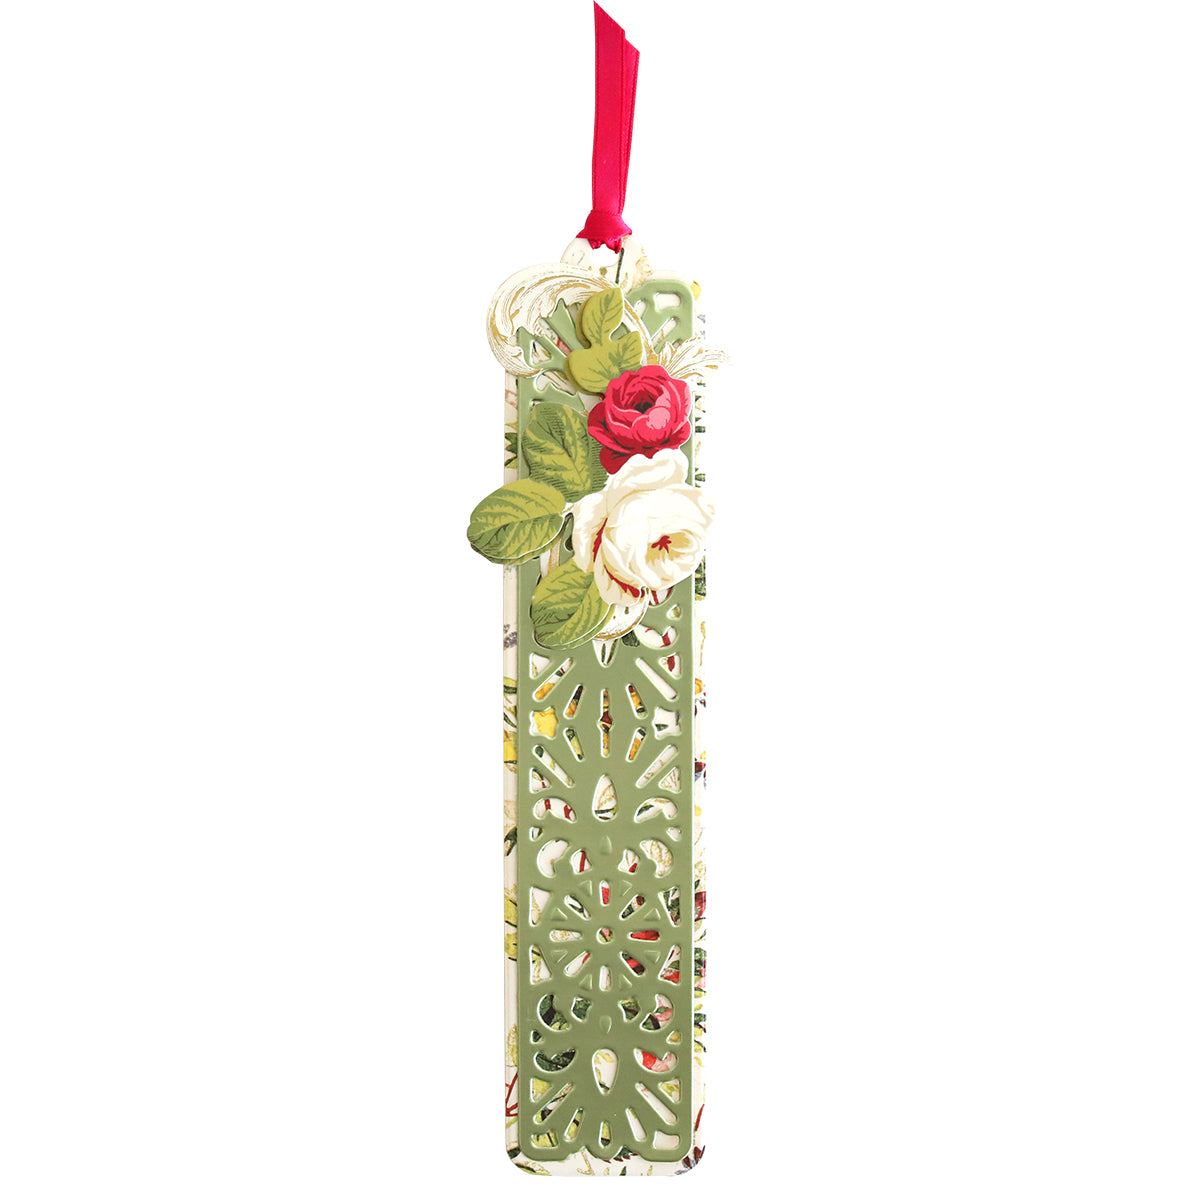 A green bookmark embellished with roses using Bookmark Dies techniques.